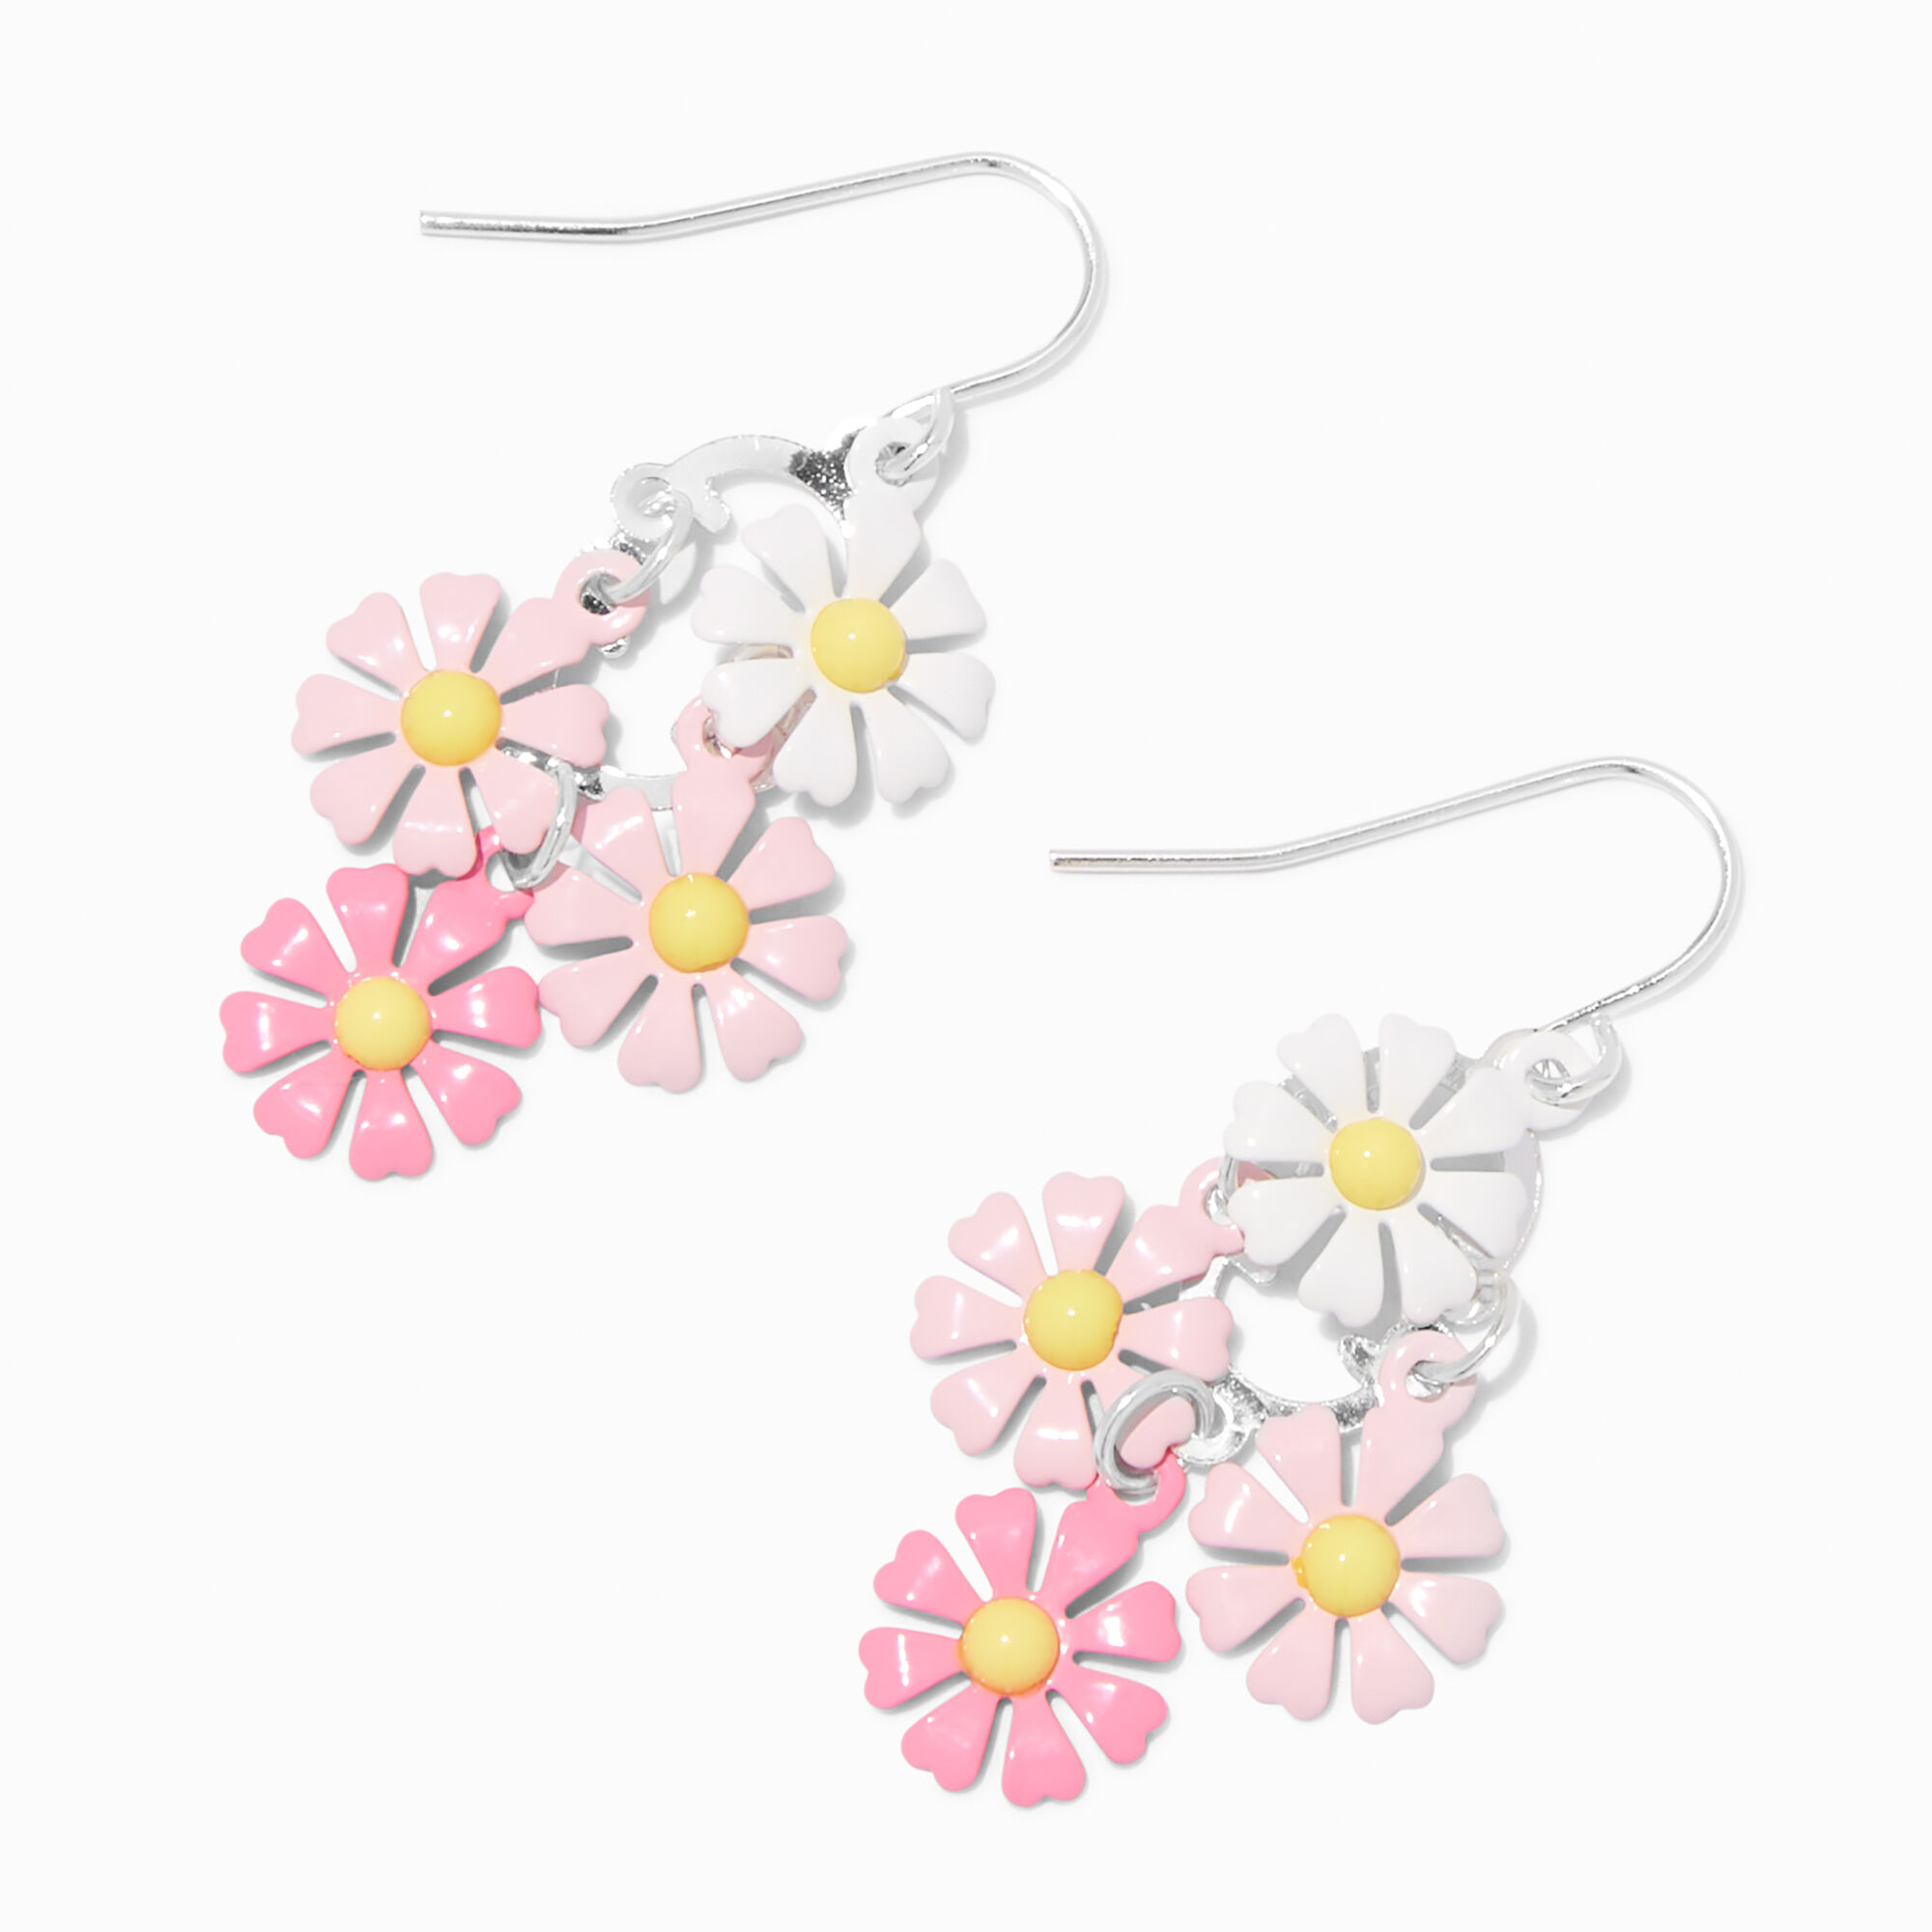 View Claires 15 Daisy Drop Earrings Pink information